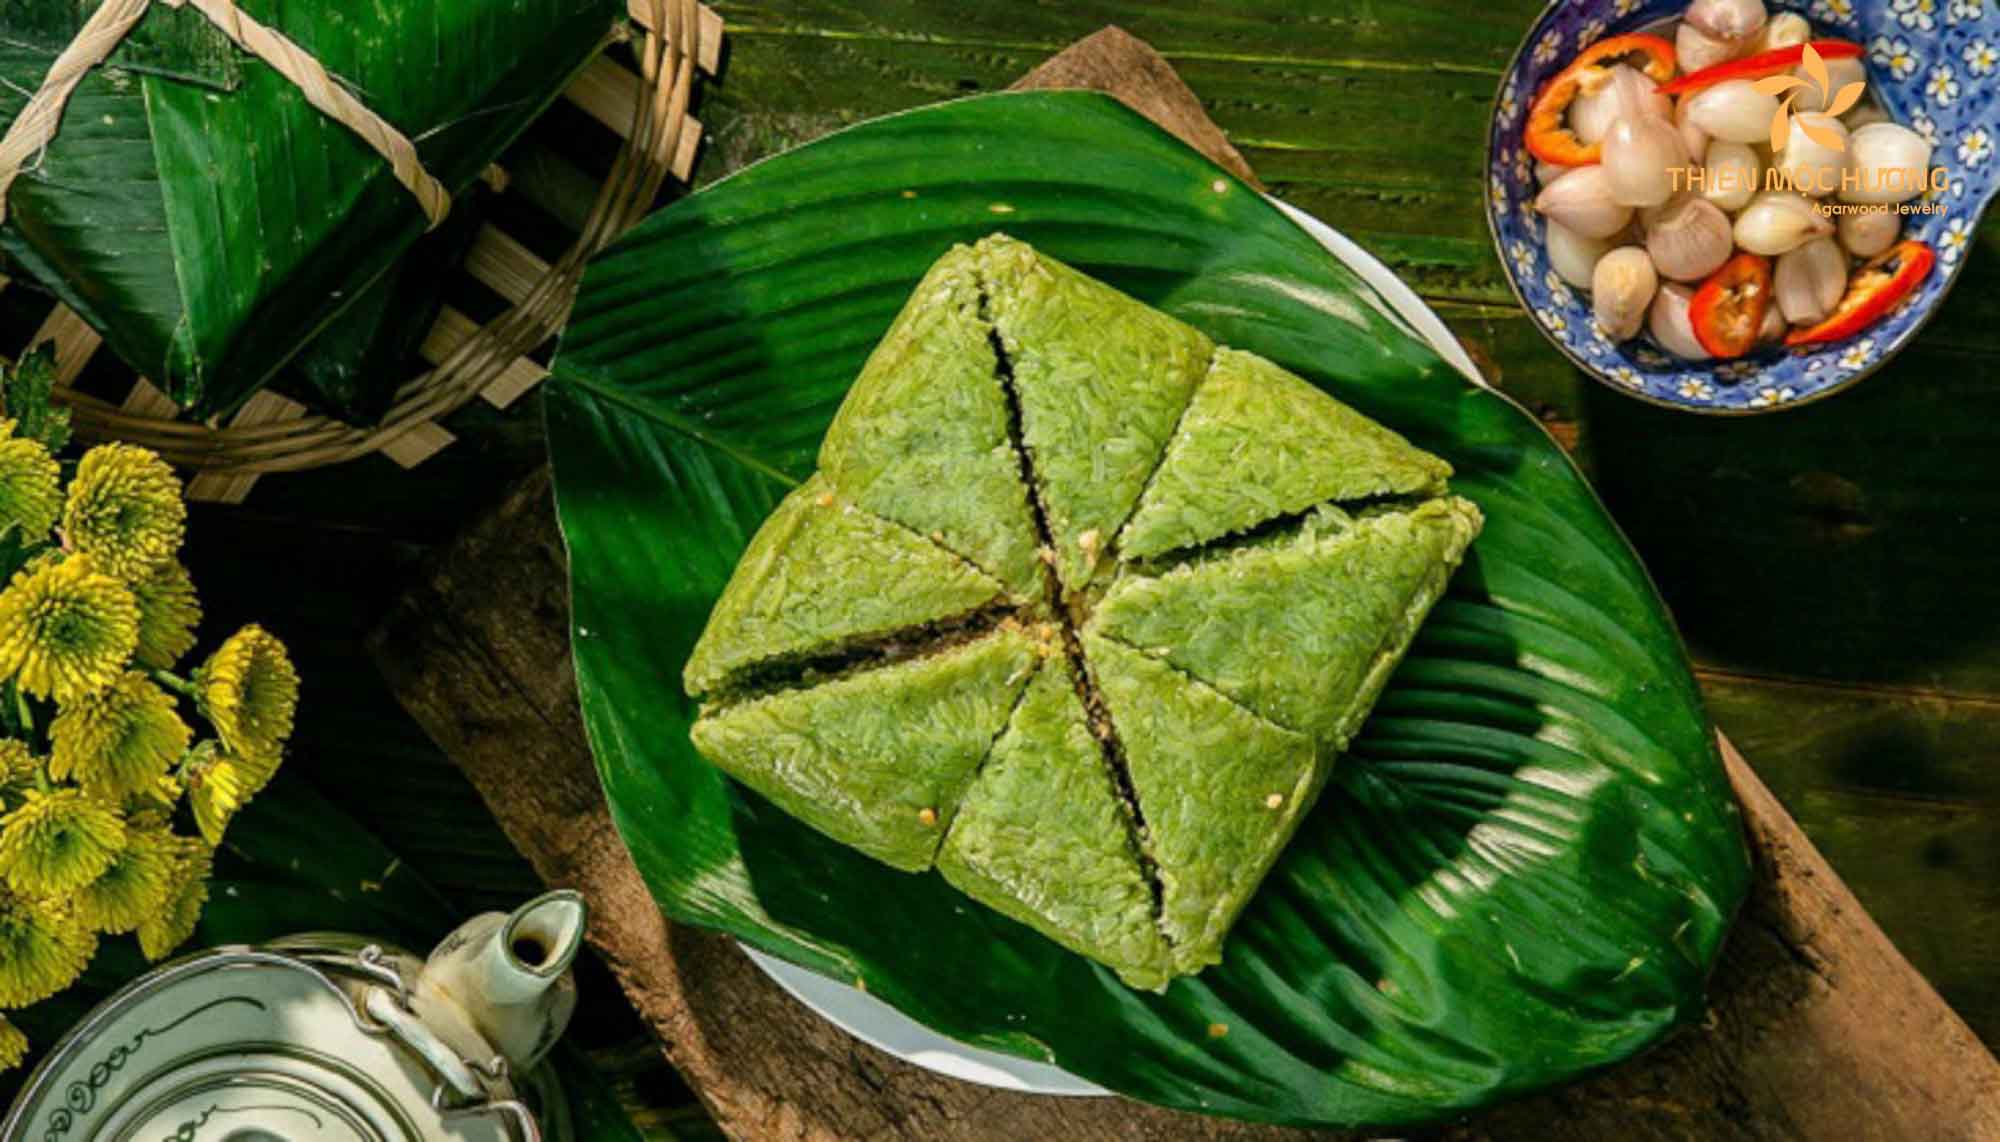 Top Vietnamese New Year Gift Ideas - Sticky Rice Cake